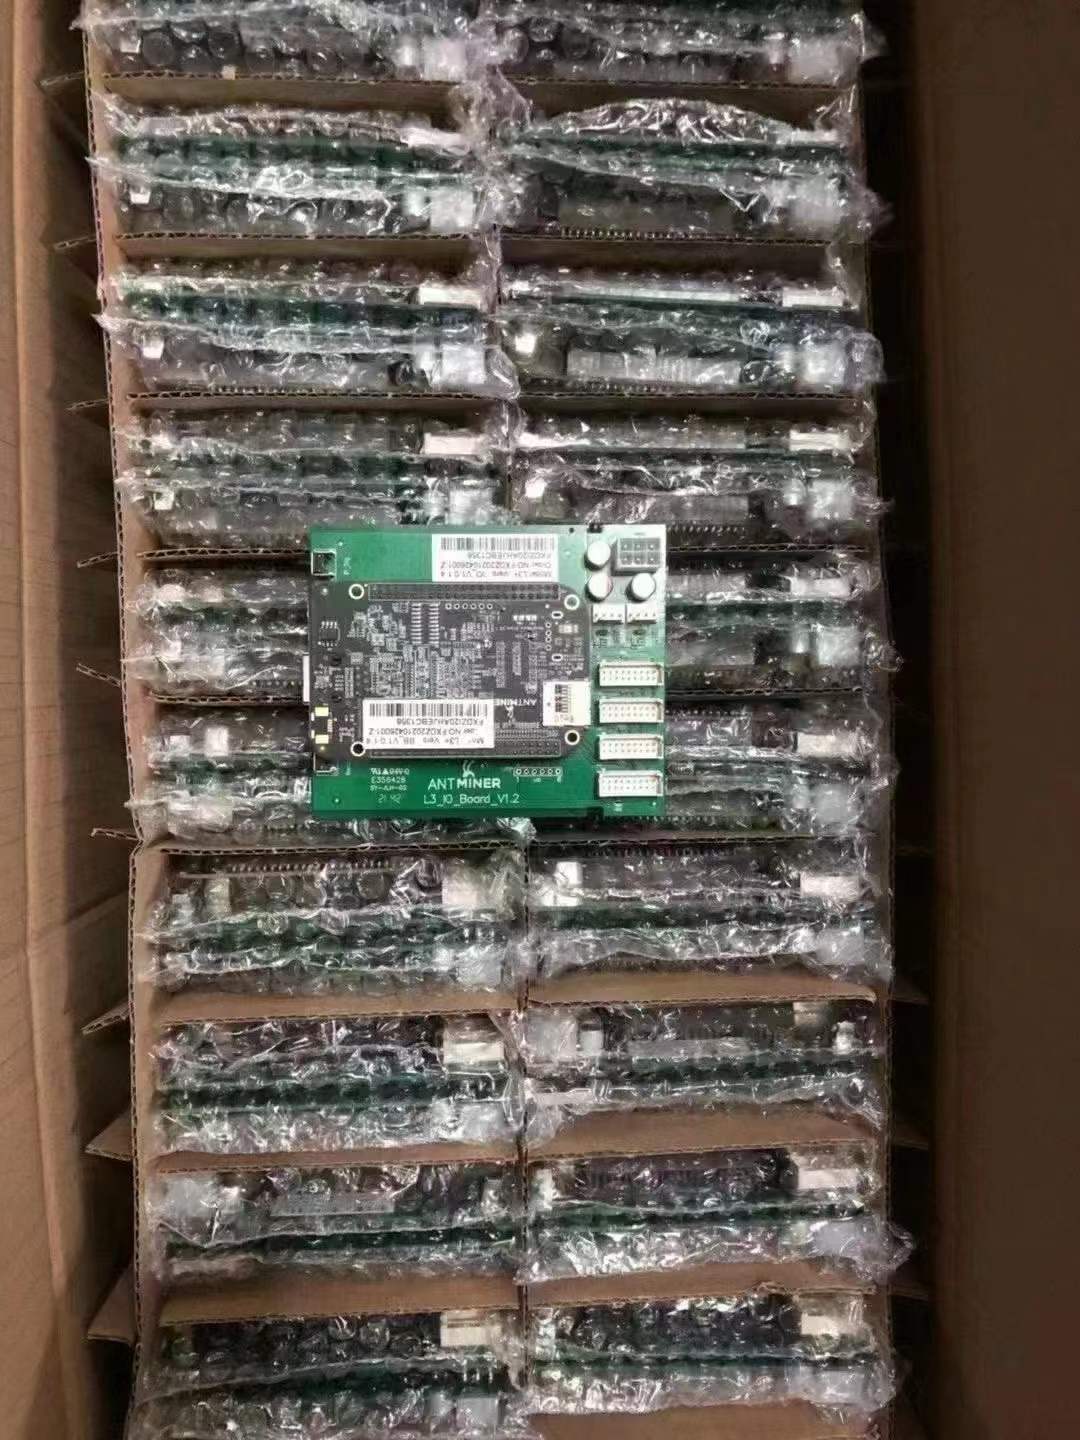 Control board for antminer S9 S9J S9I S9K